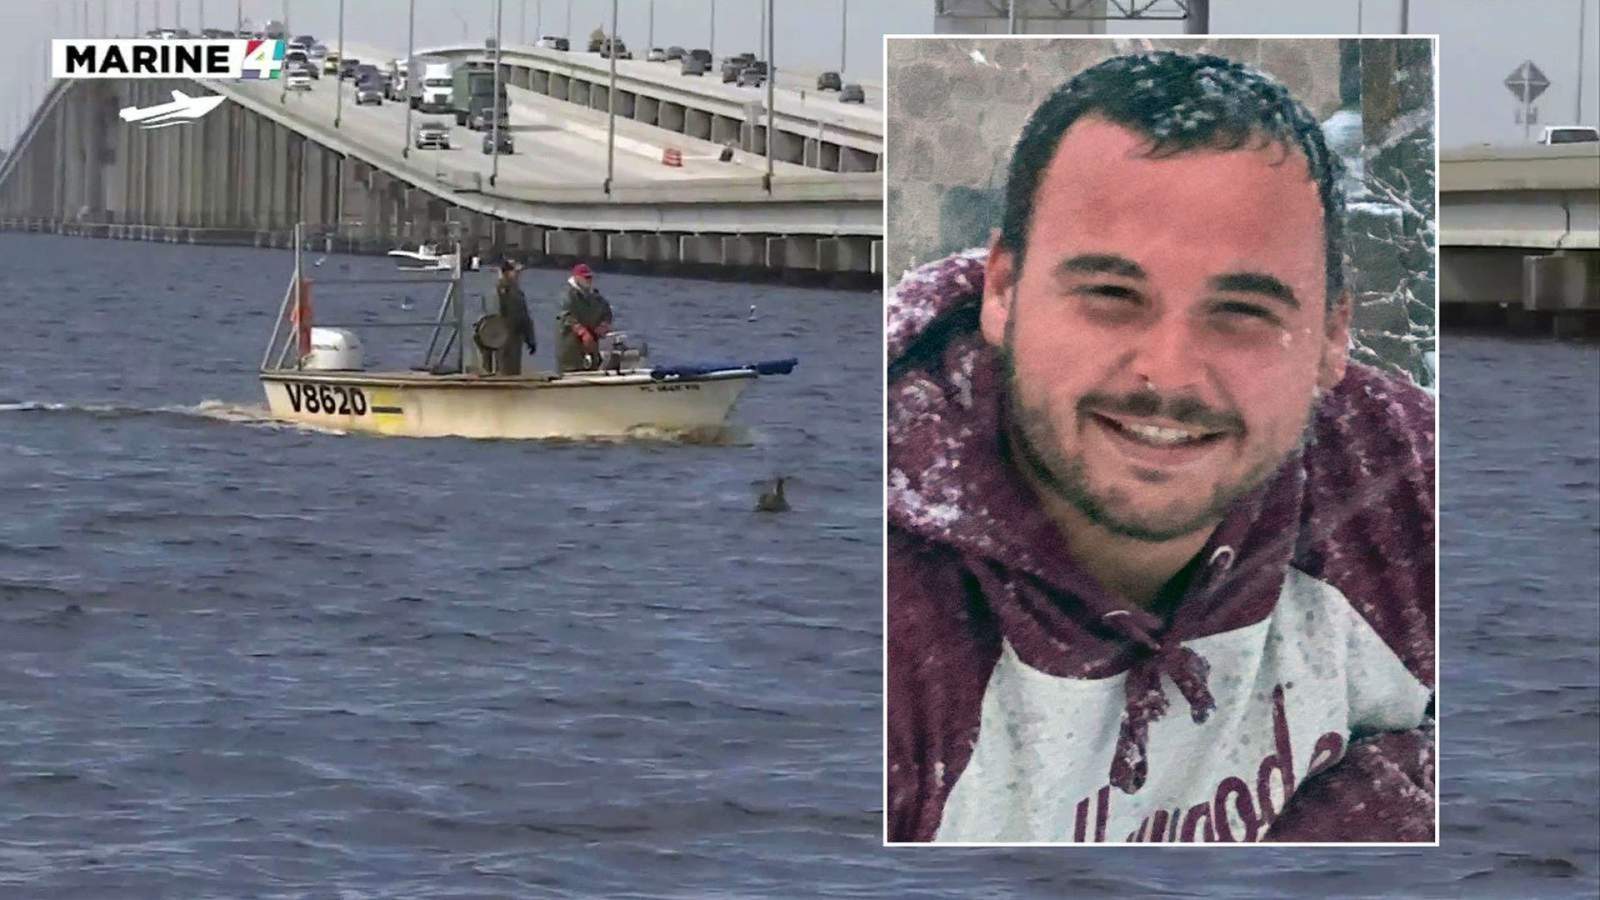 Coast Guard suspends search for missing boater